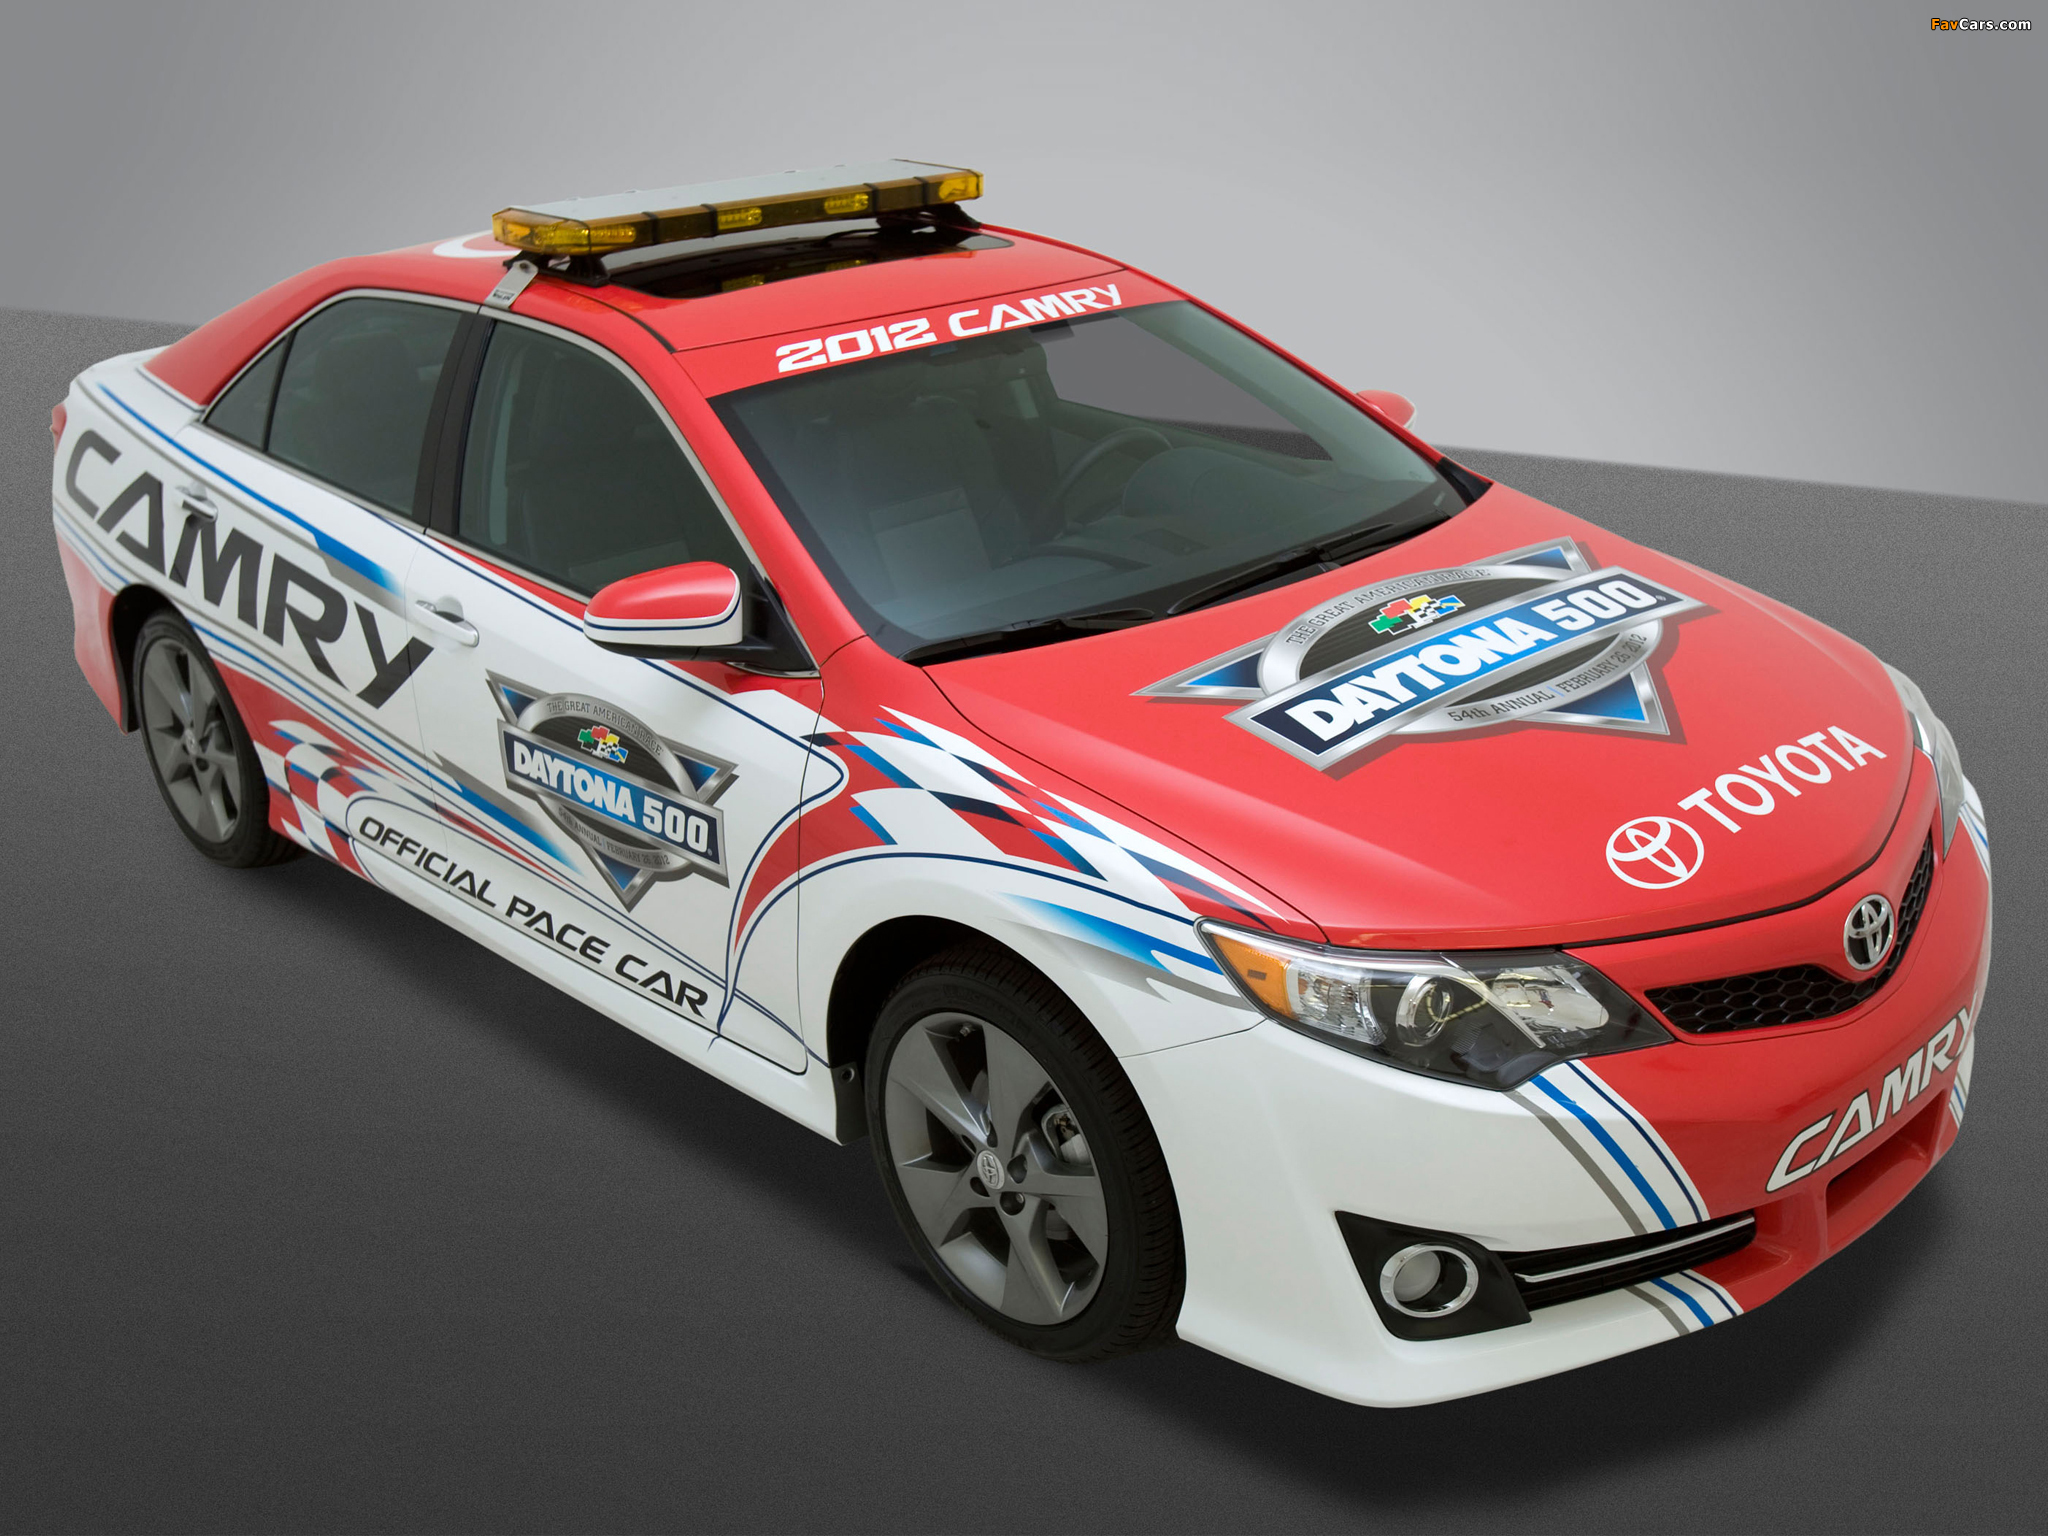 Toyota Camry SE Daytona 500 Pace Car 2012 pictures (2048 x 1536)